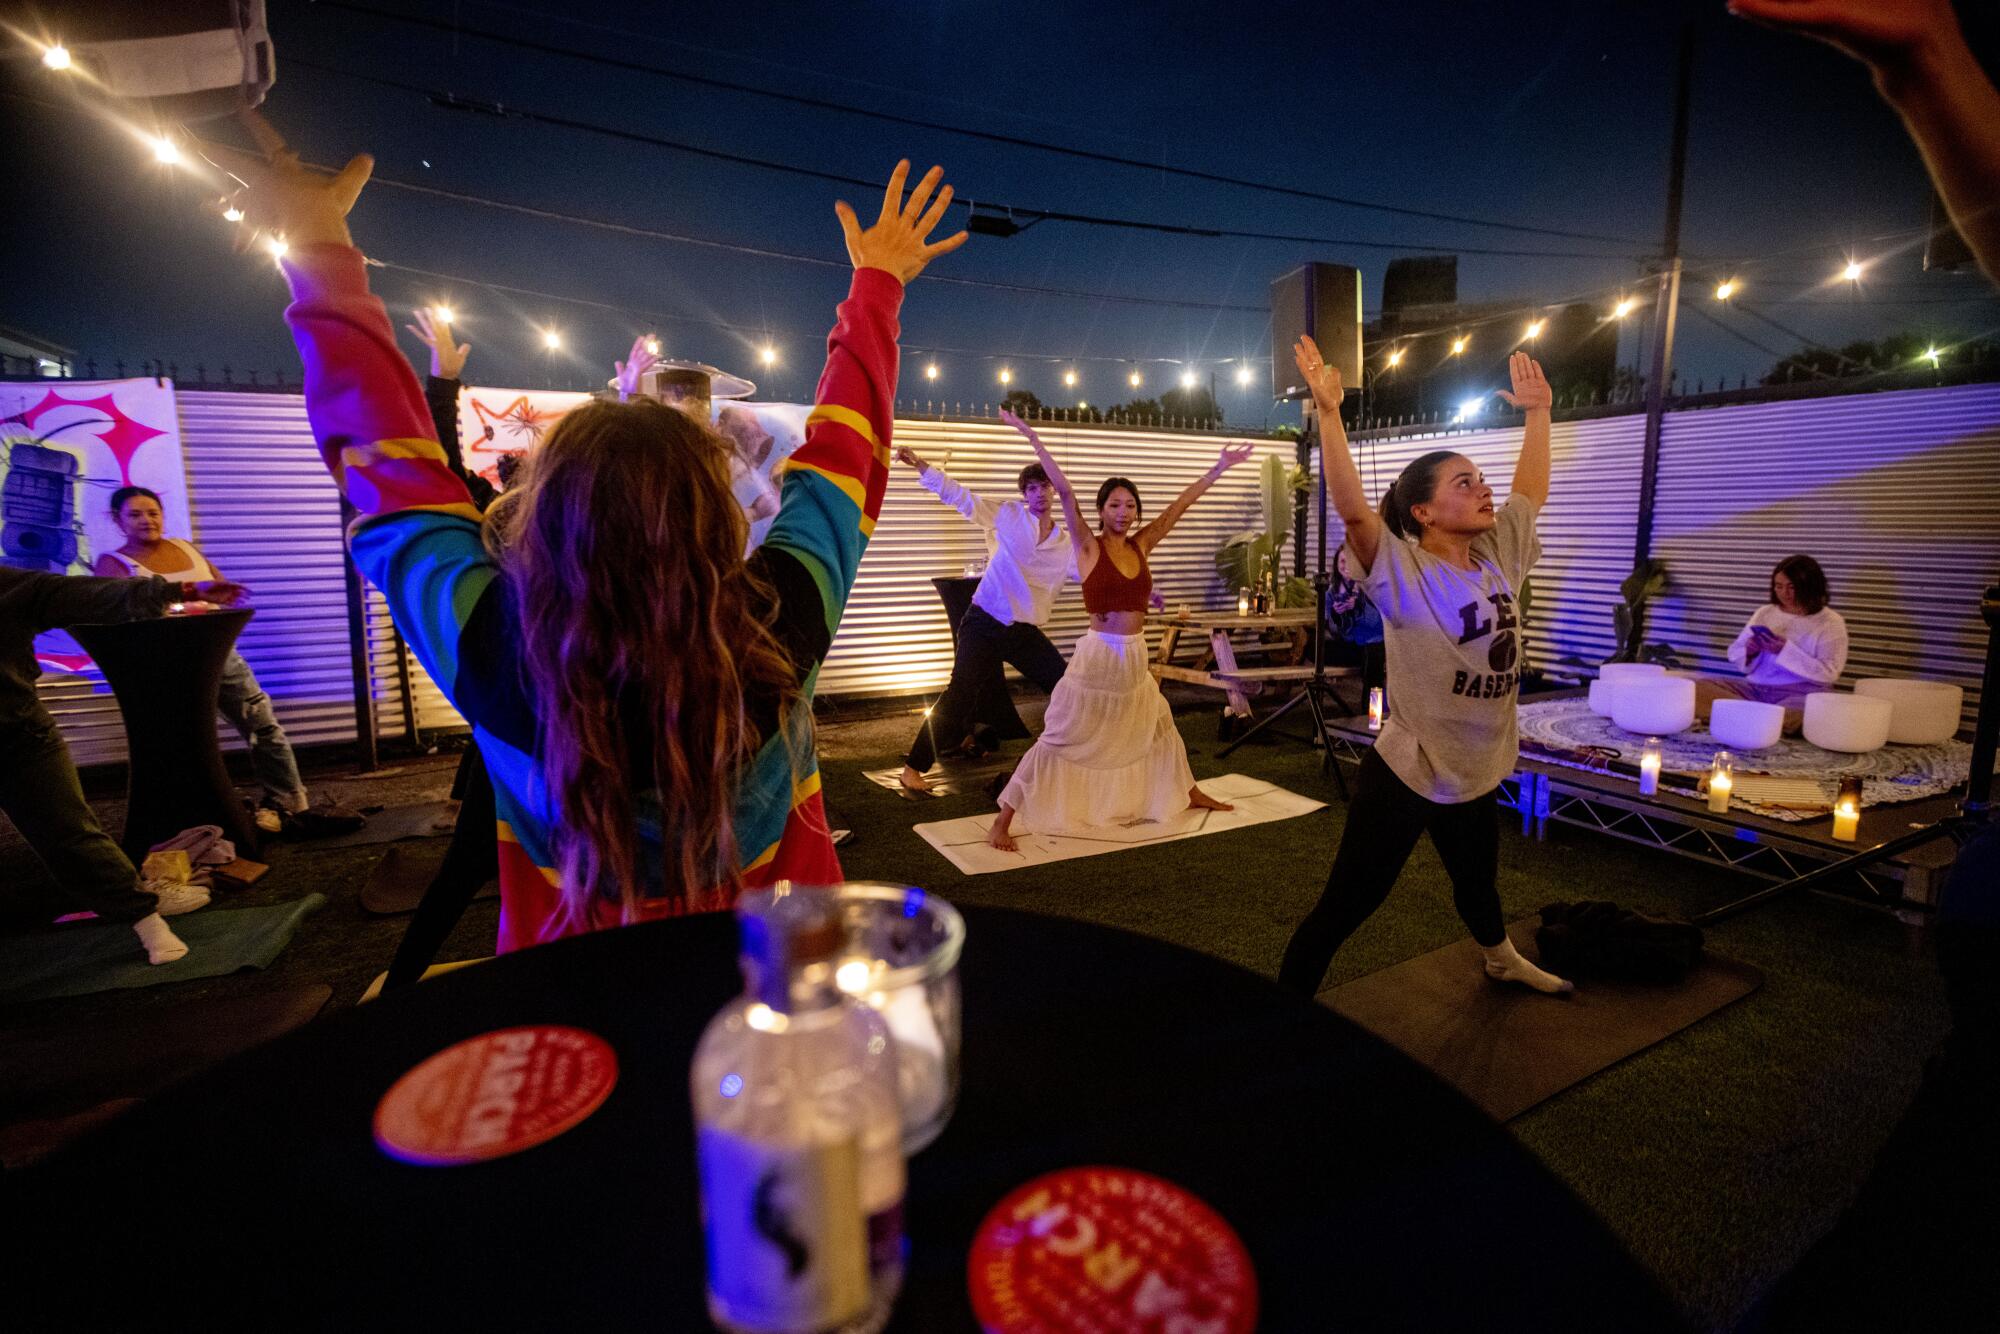 People do yoga under string lights at night.